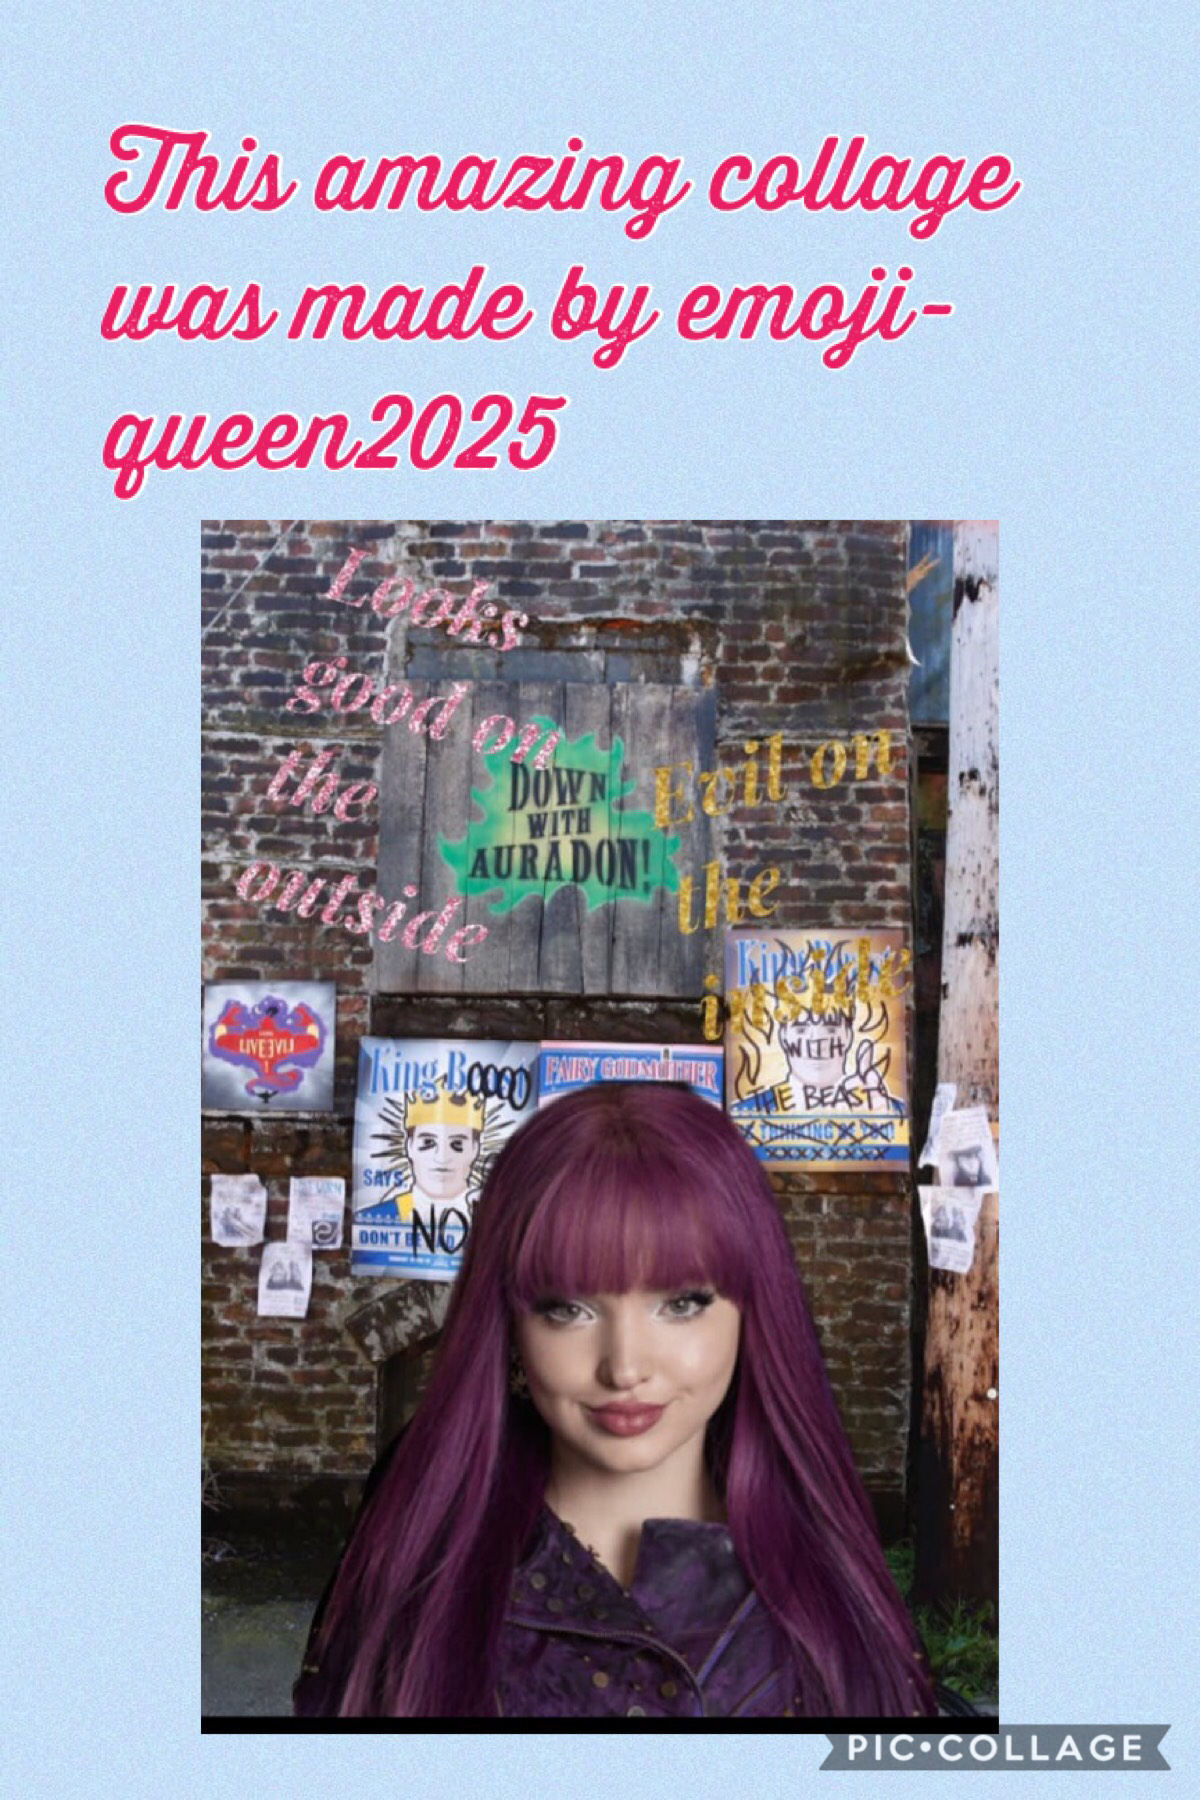 This amazing collage was made by emoji-queen2025